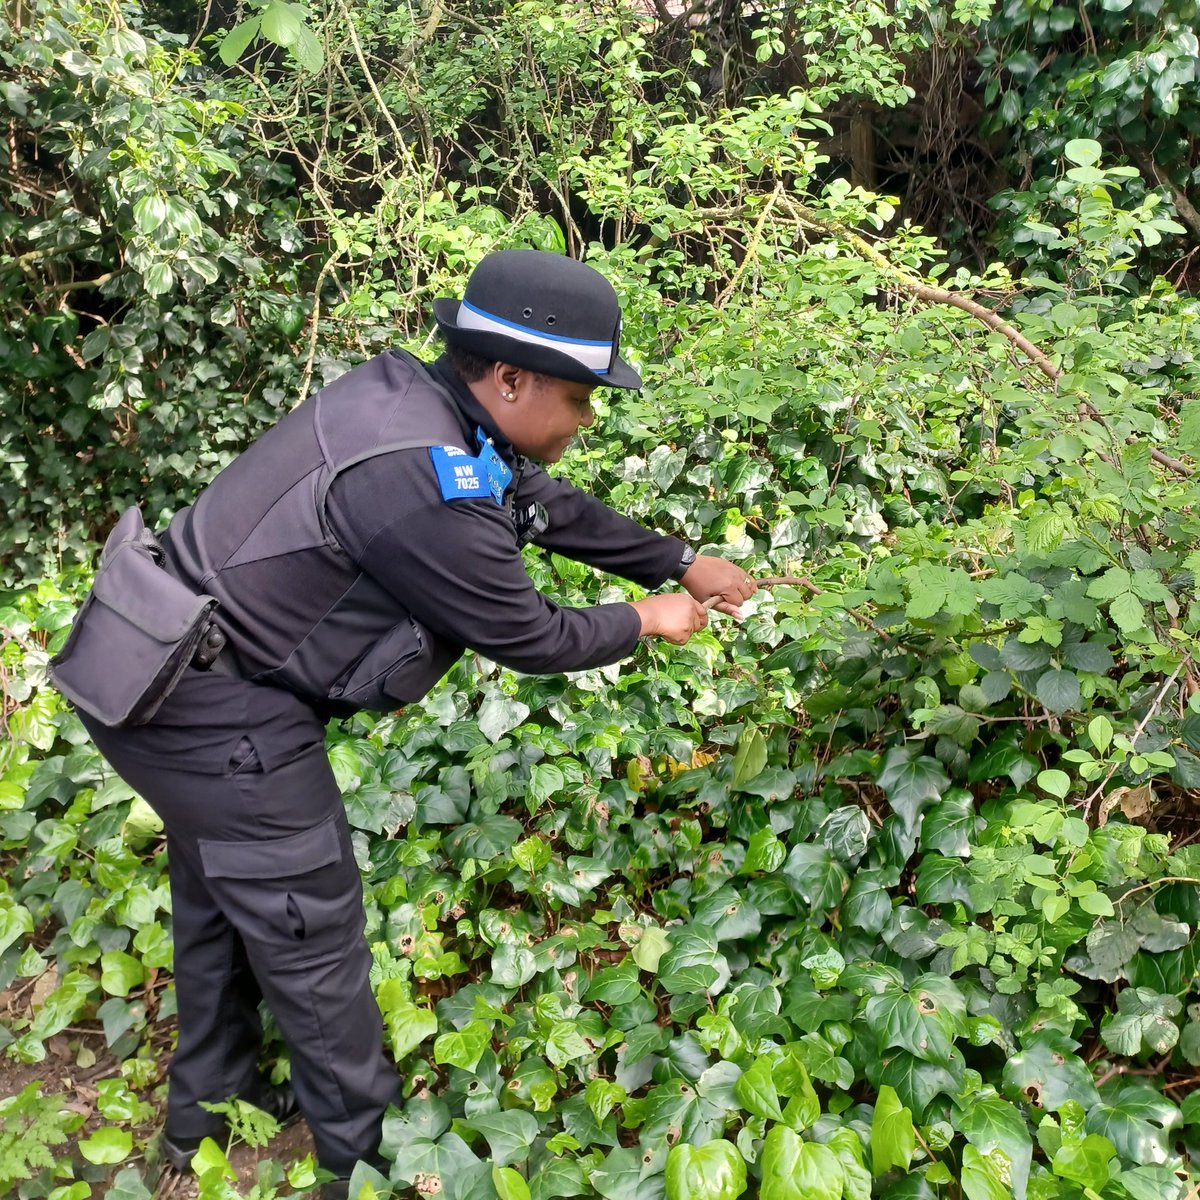 Your local ward officers are out & about on the ward today, offering reassurance to our residents. When it comes to a weapon sweep, we dont beat about the bushes! No weapons were found this time. If you see us come say hello 👋 #DobbinClose #NatureTrail #KeepingYouSafe